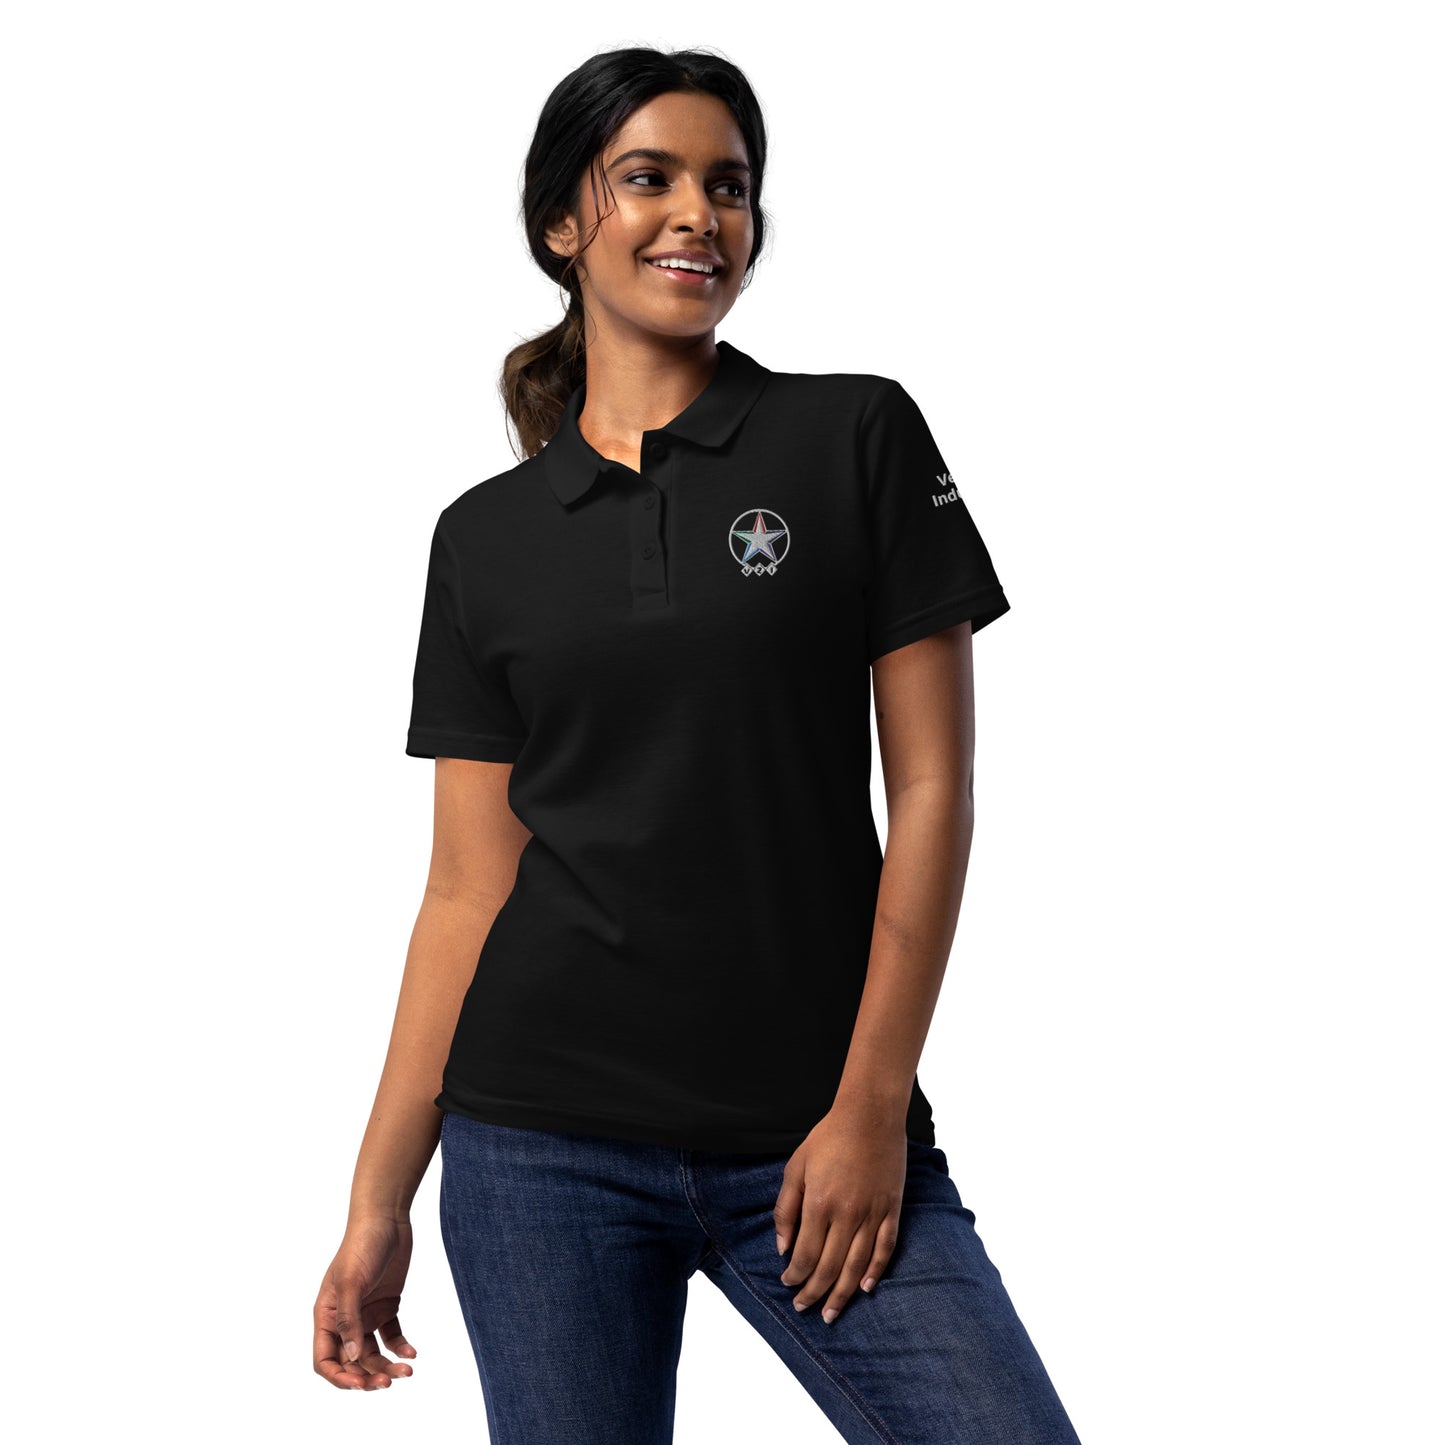 Vets2Industry Women’s Pique Polo Shirt